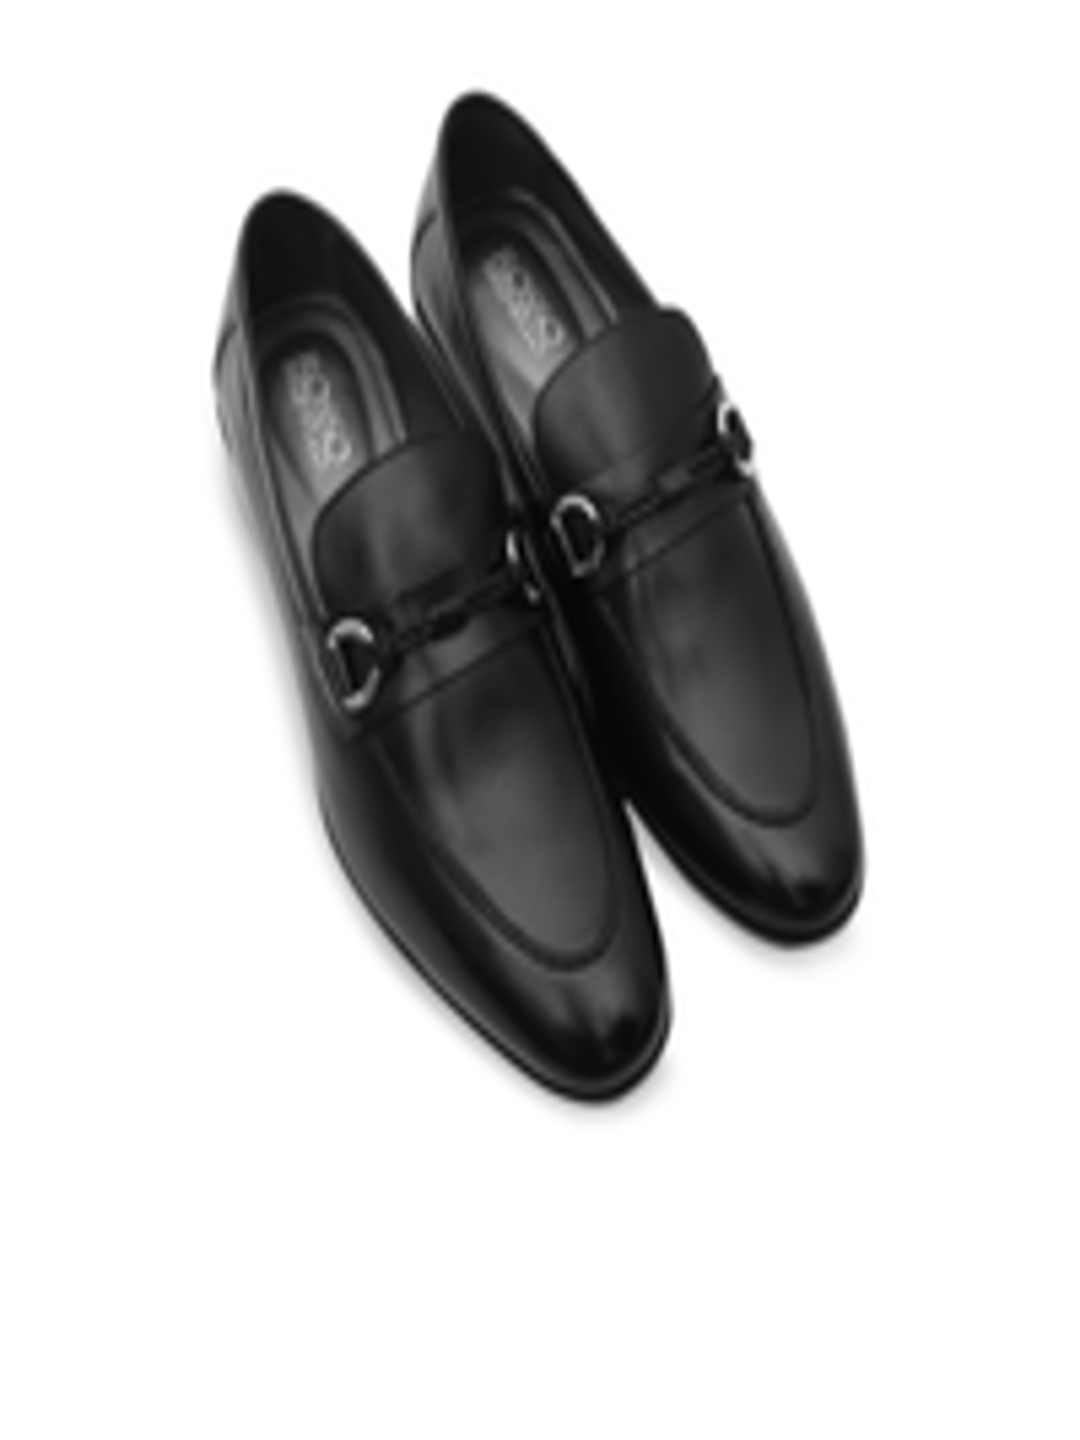 Buy ROSSO BRUNELLO Men Black Solid Italian Leather Formal Loafers ...